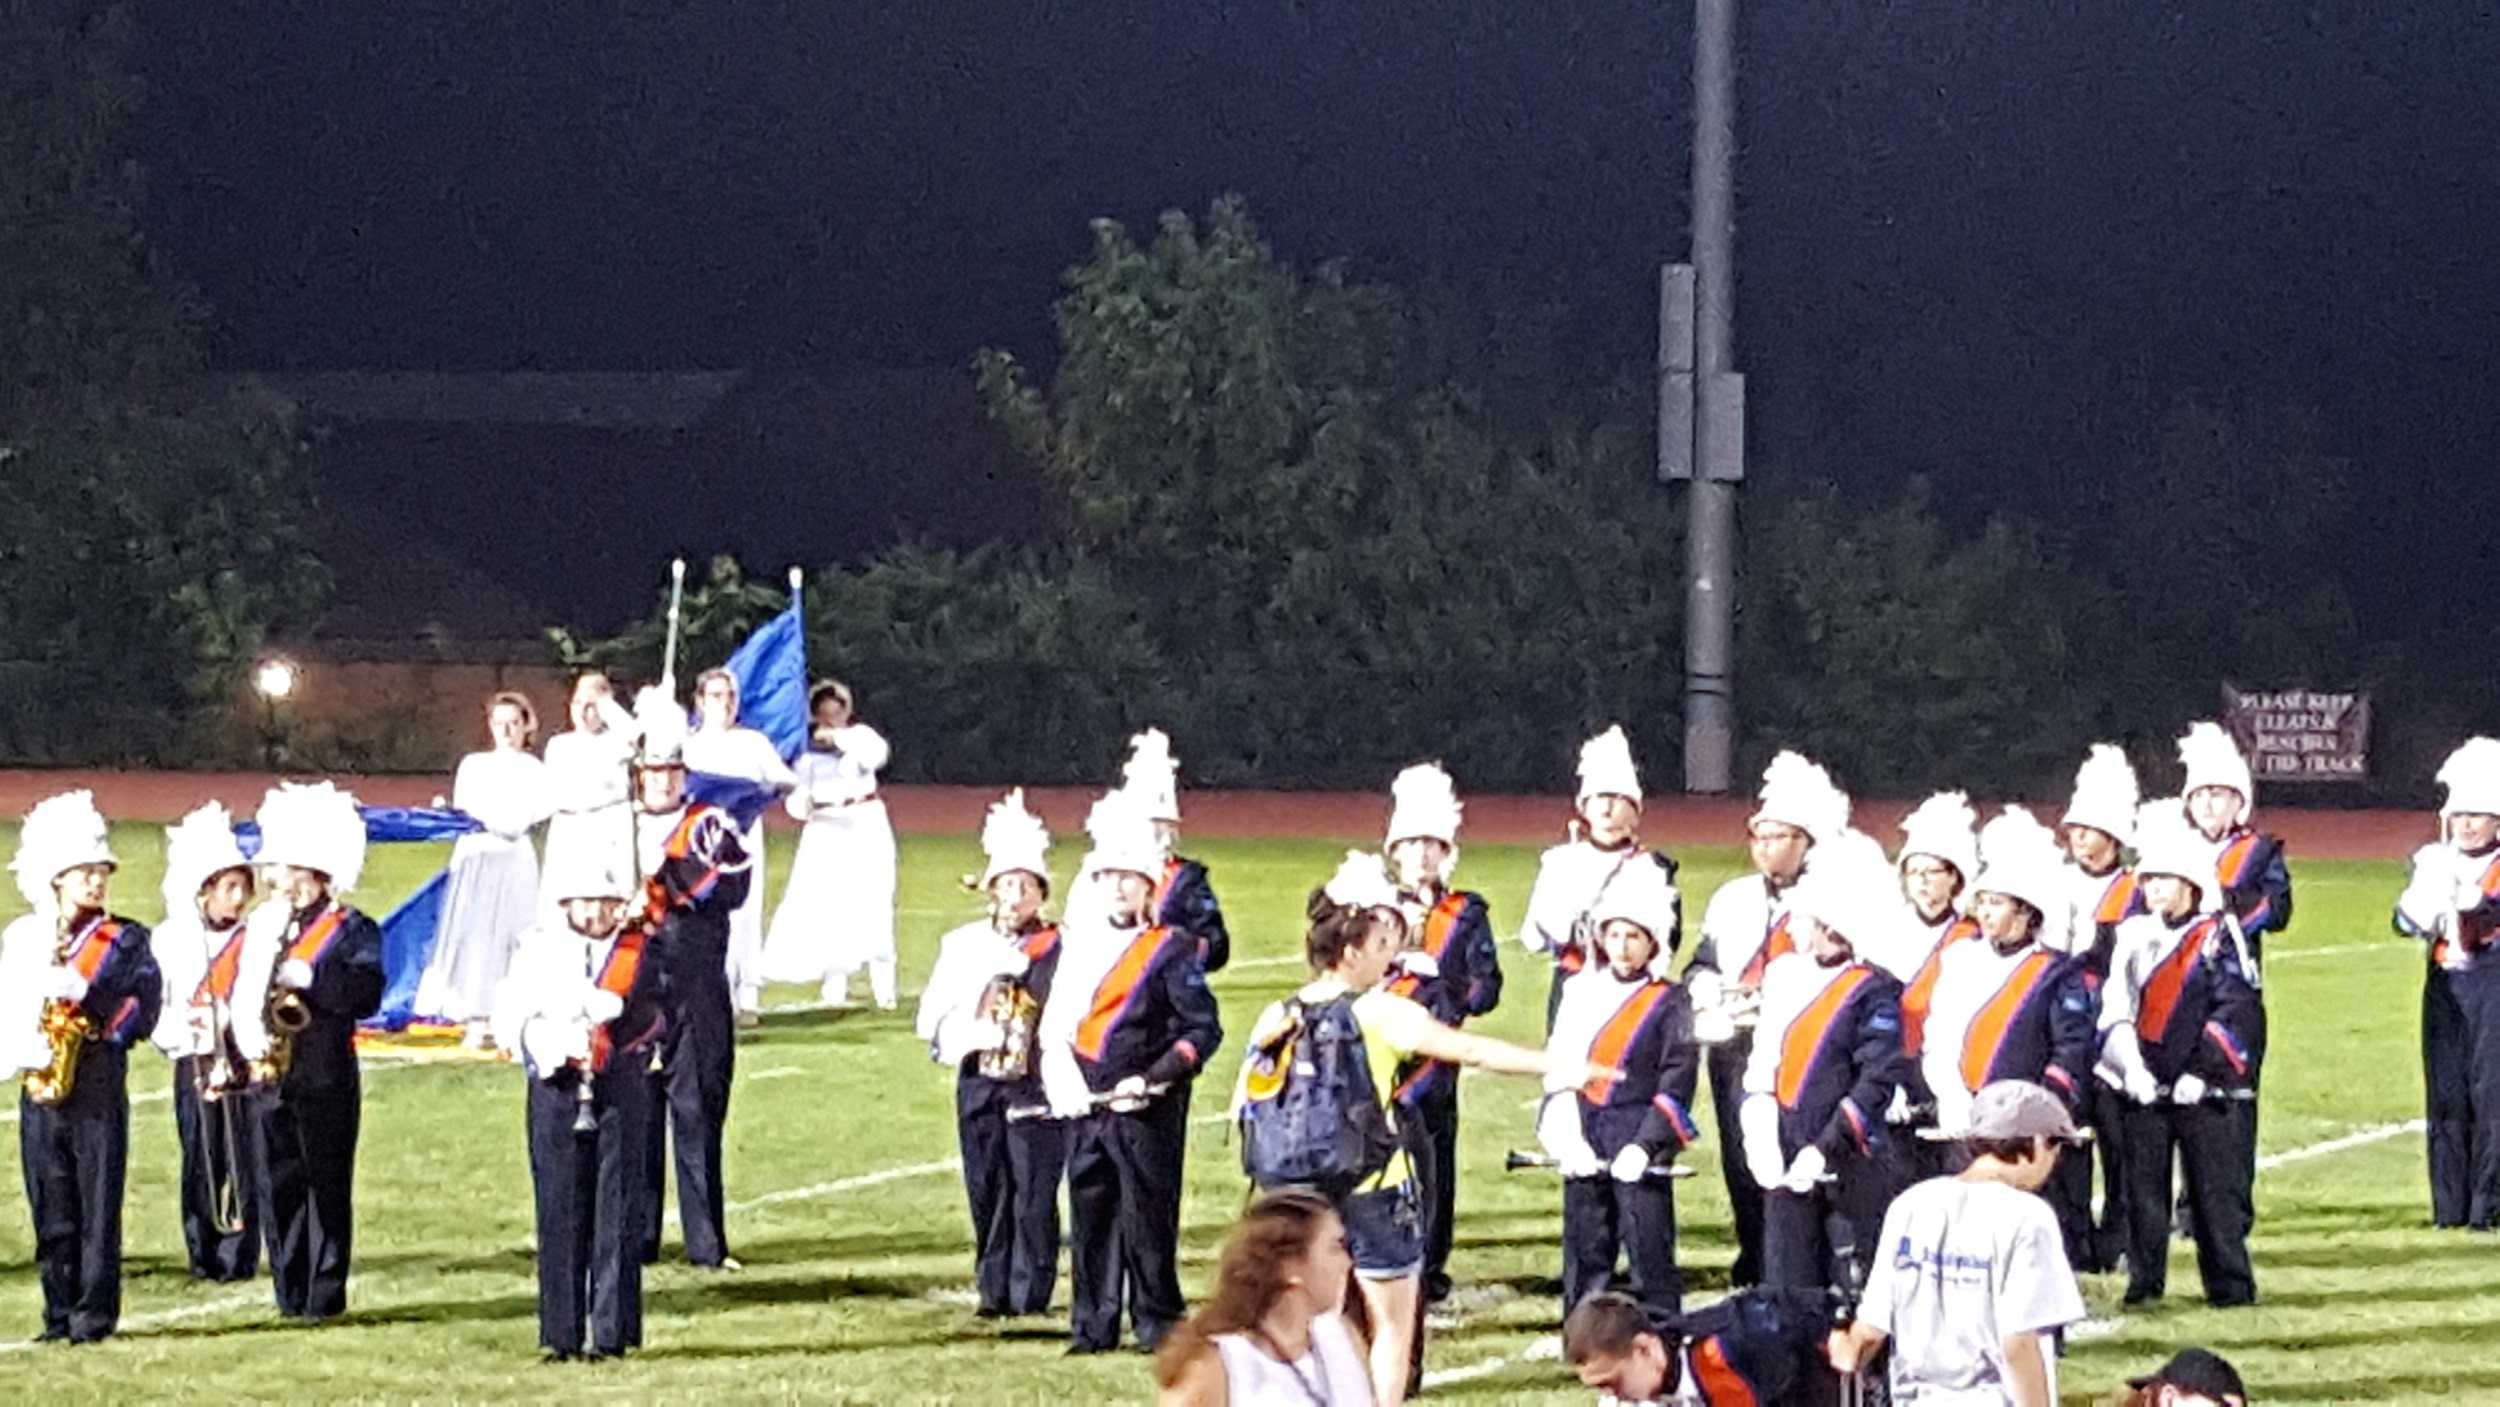 On Saturday, Sept. 10, the DHS Marching Band took first place at Bethel High School's "Quest for the Best" marching band competition. DHS received awards for Best Music, Best Visual, and Best Effect.